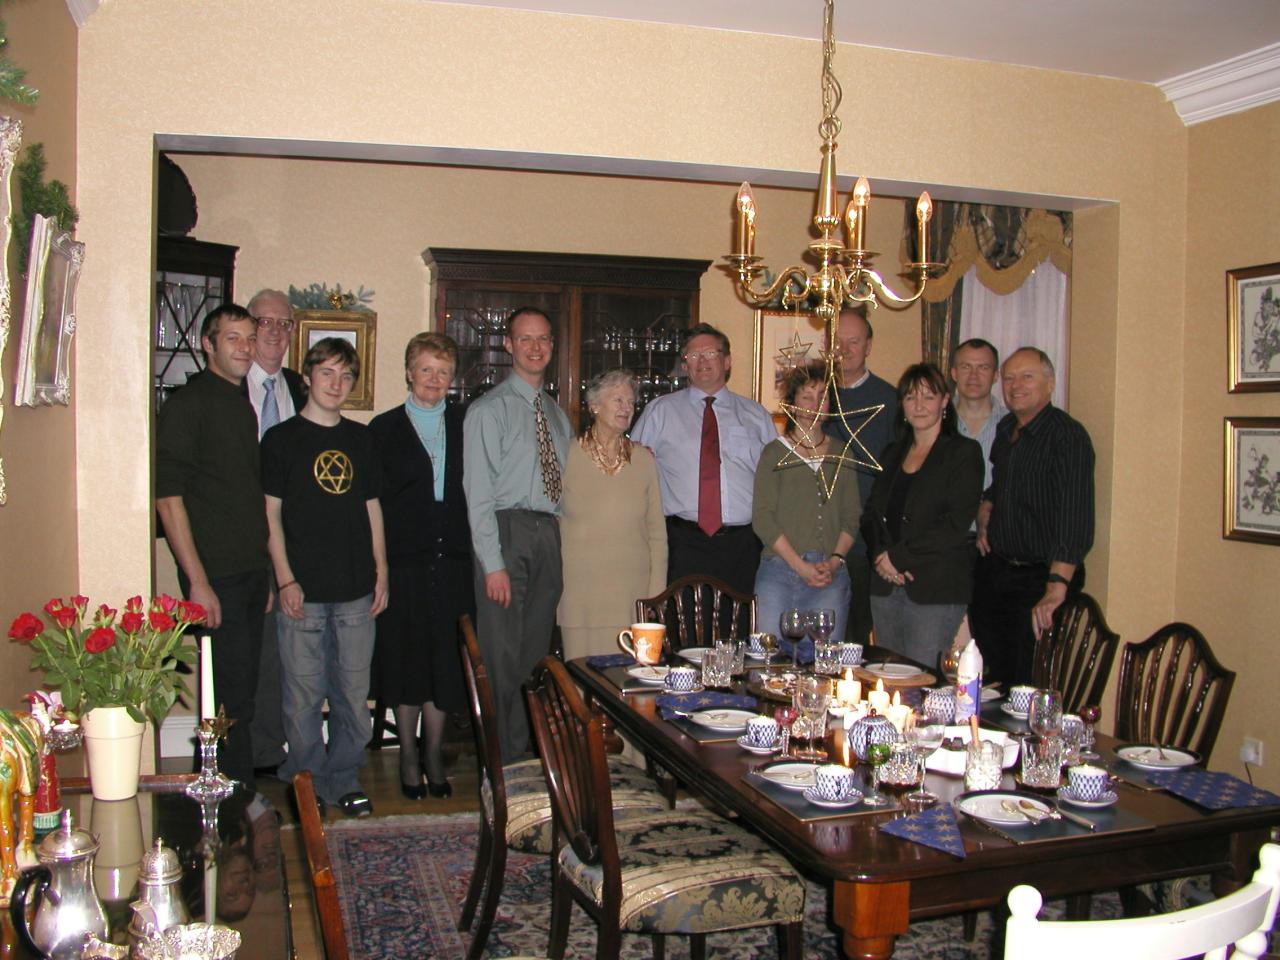 JPEG image - The family gathered, but slightly obscured by Christmas decorations! ...